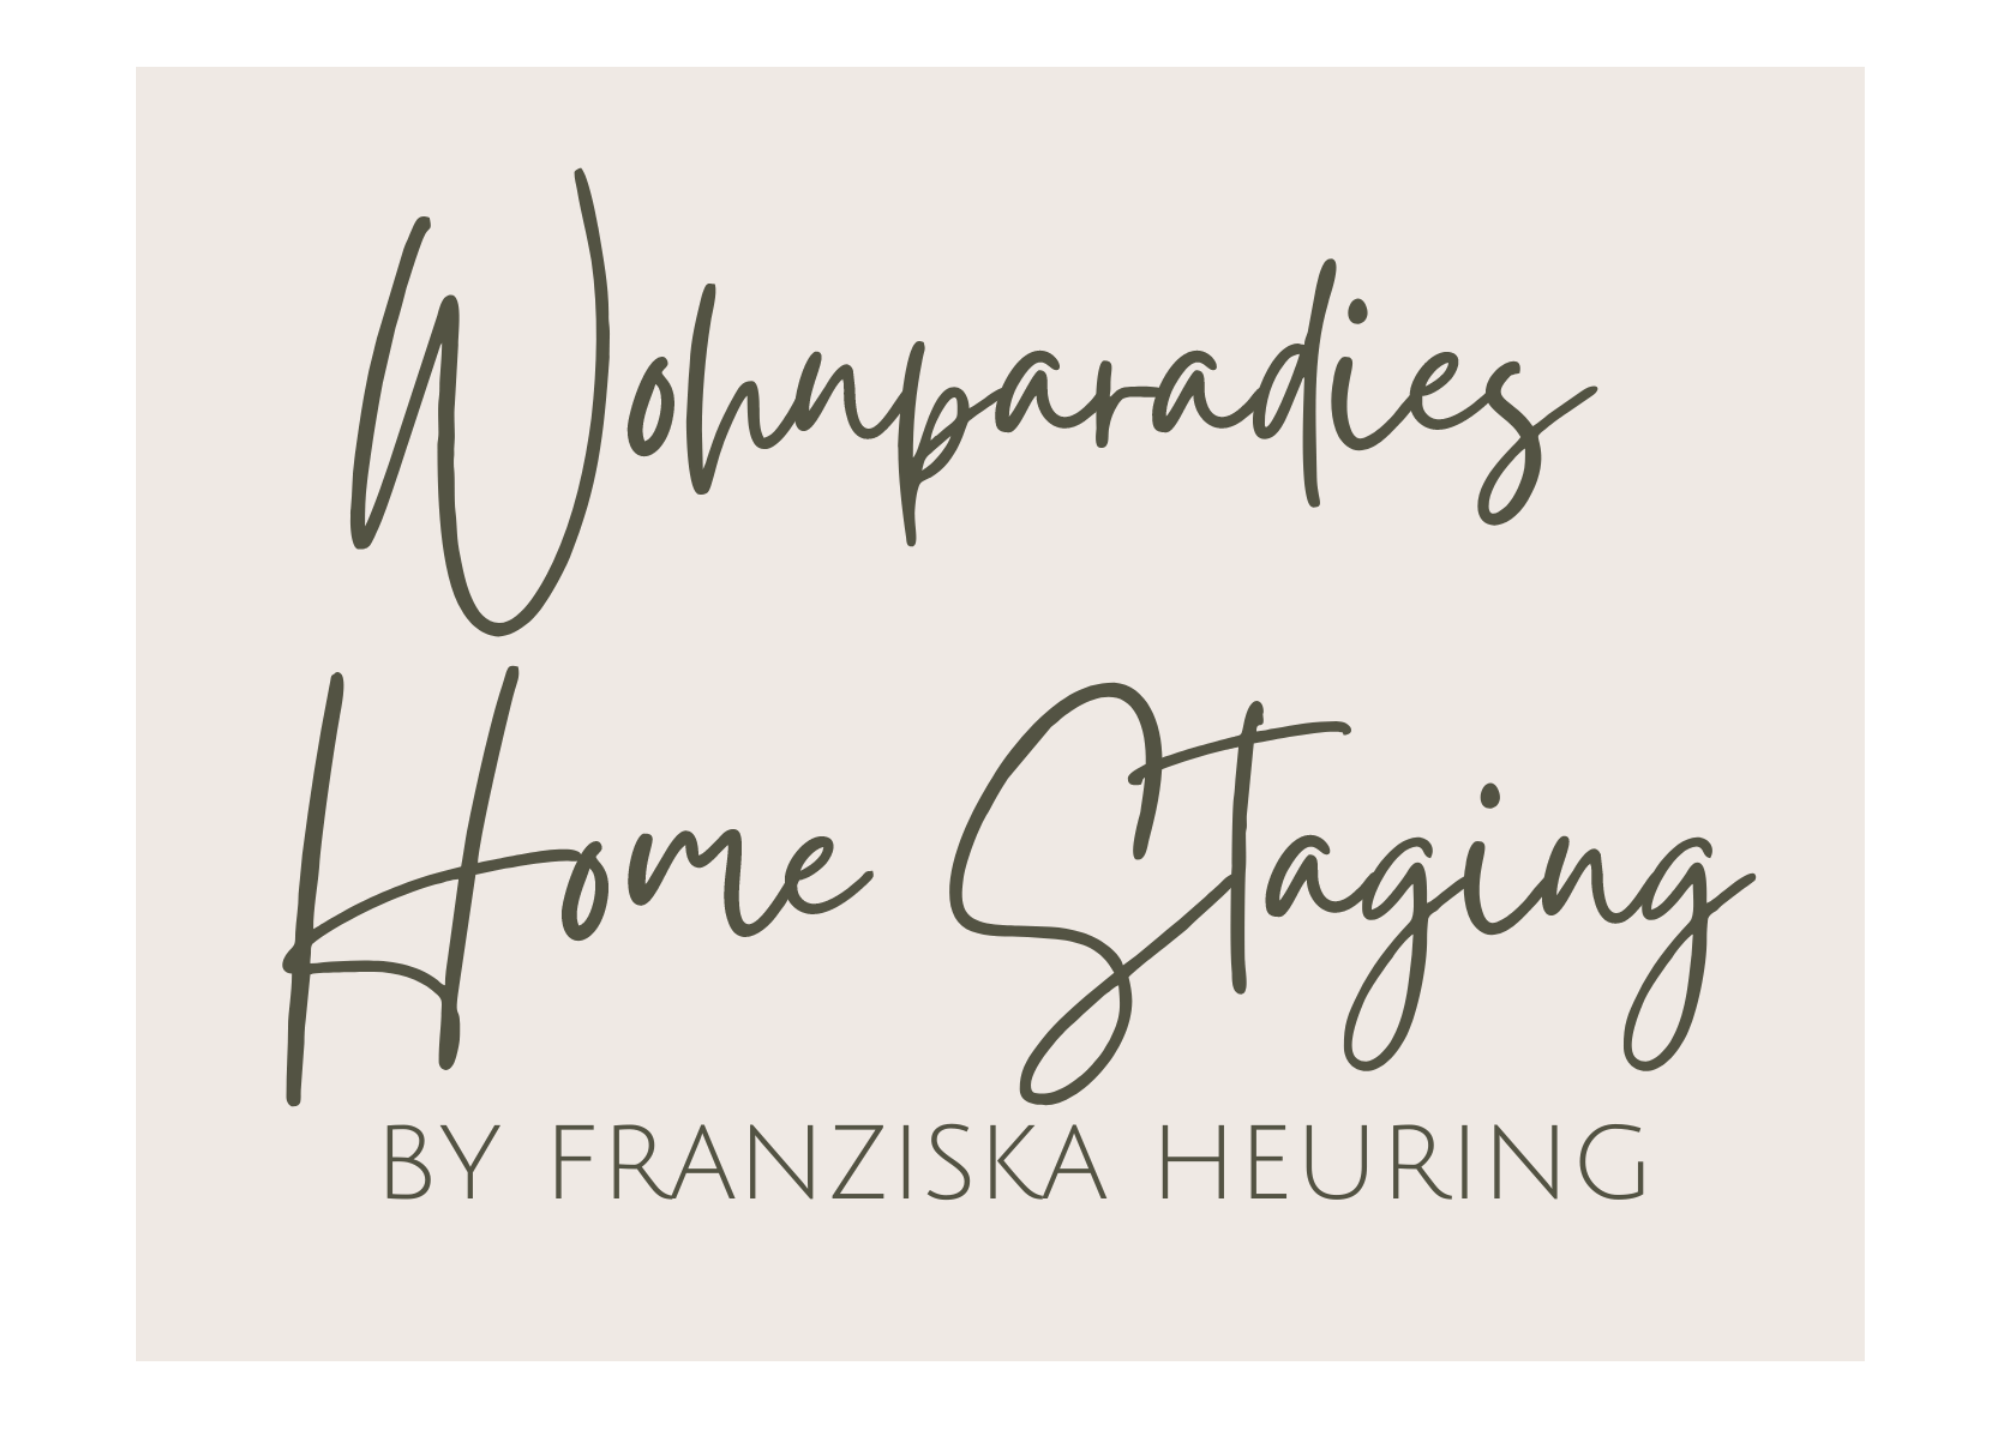 Wohnparadies Home Staging